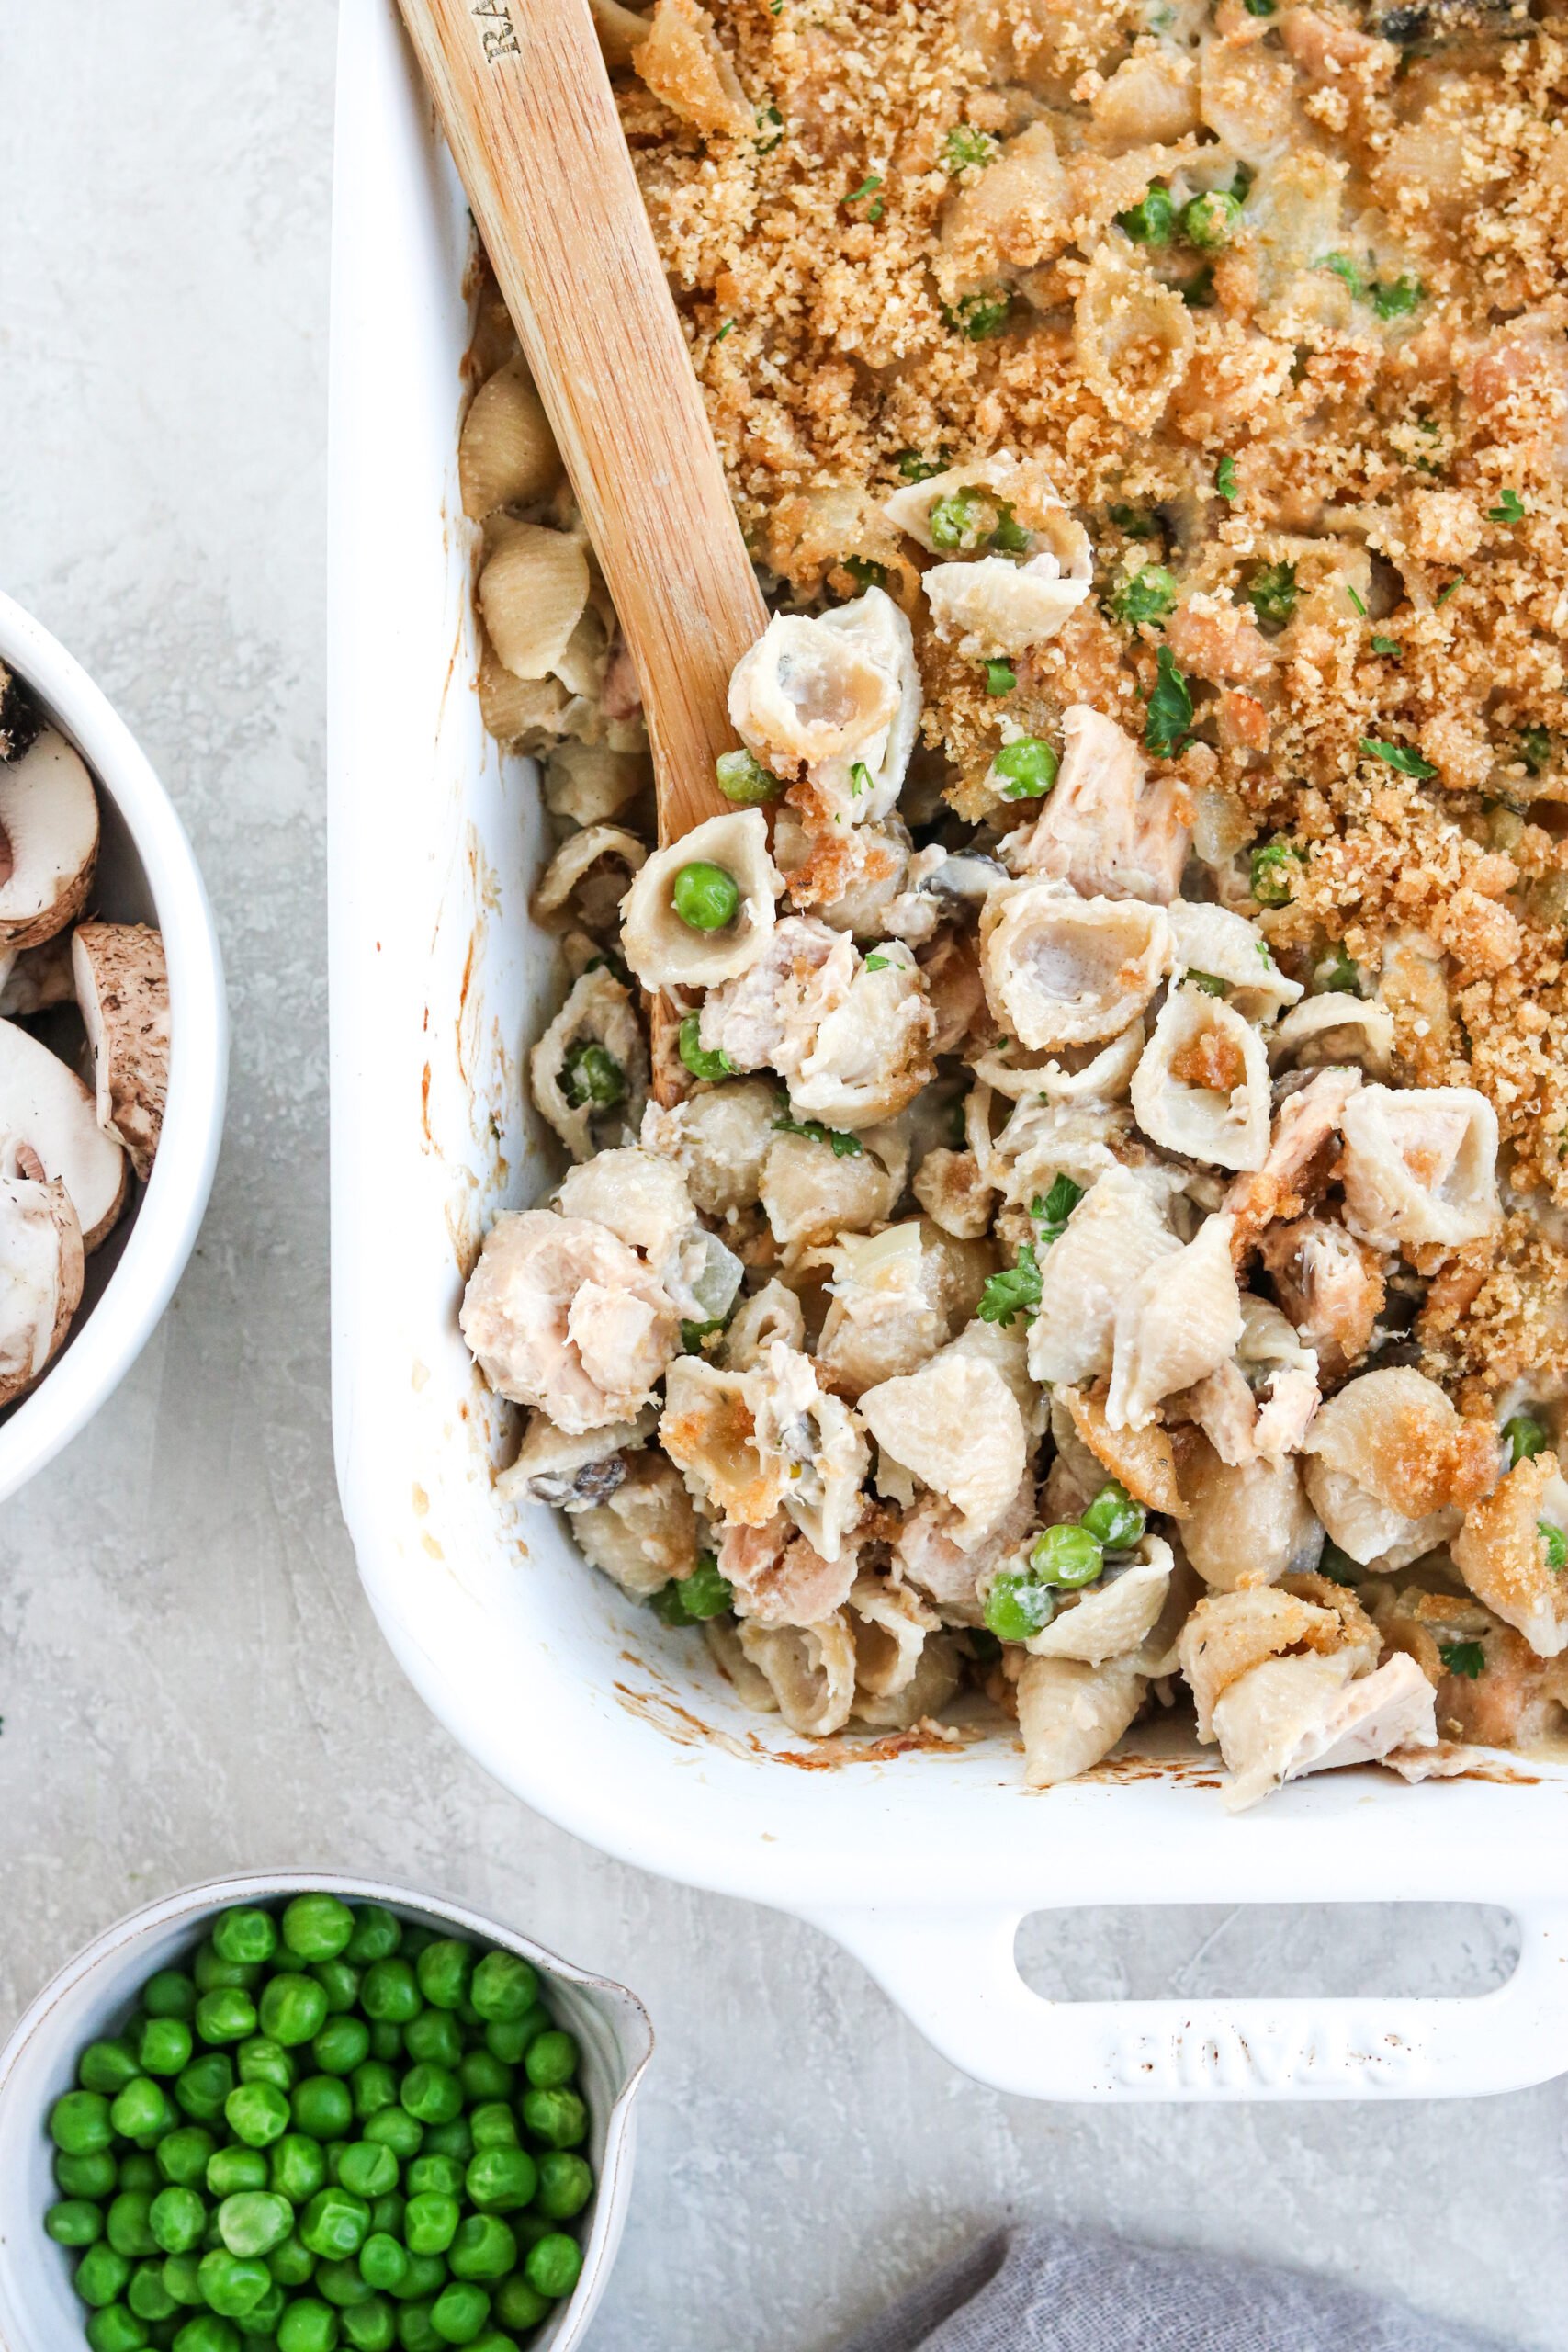 Gluten Free Tuna Noodle Casserole with peas and mushrooms